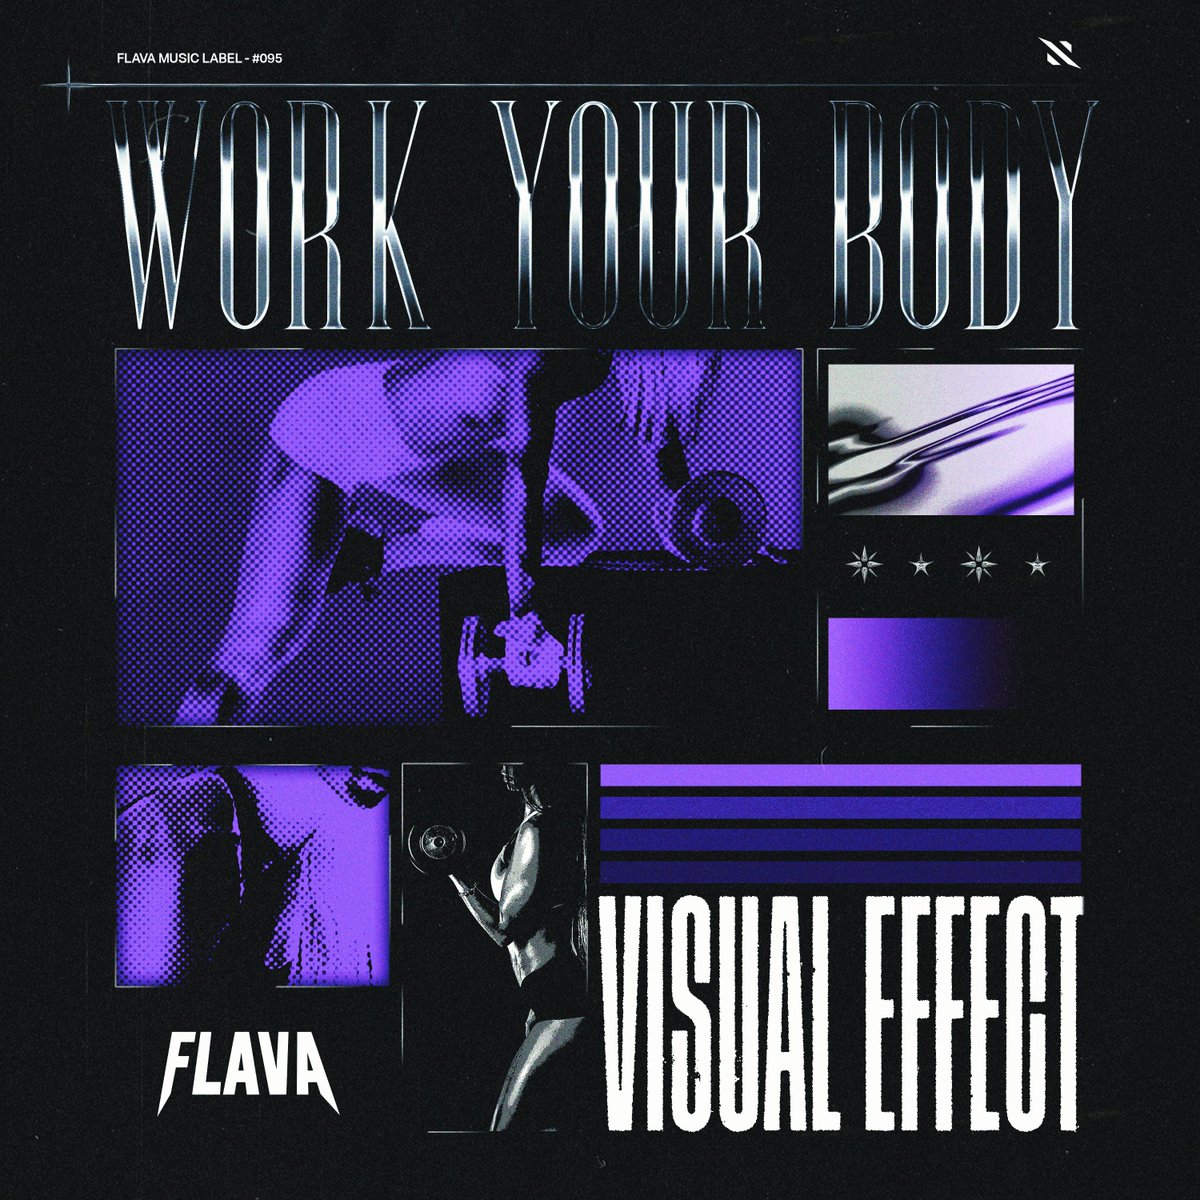 Festival tech house banger 'Work Your Body' by Visual Effect is coming up April 12th on FLAVA ⚡️ #interplayrec #GOTFLAVA Pre-order: interplay.ffm.to/flv095